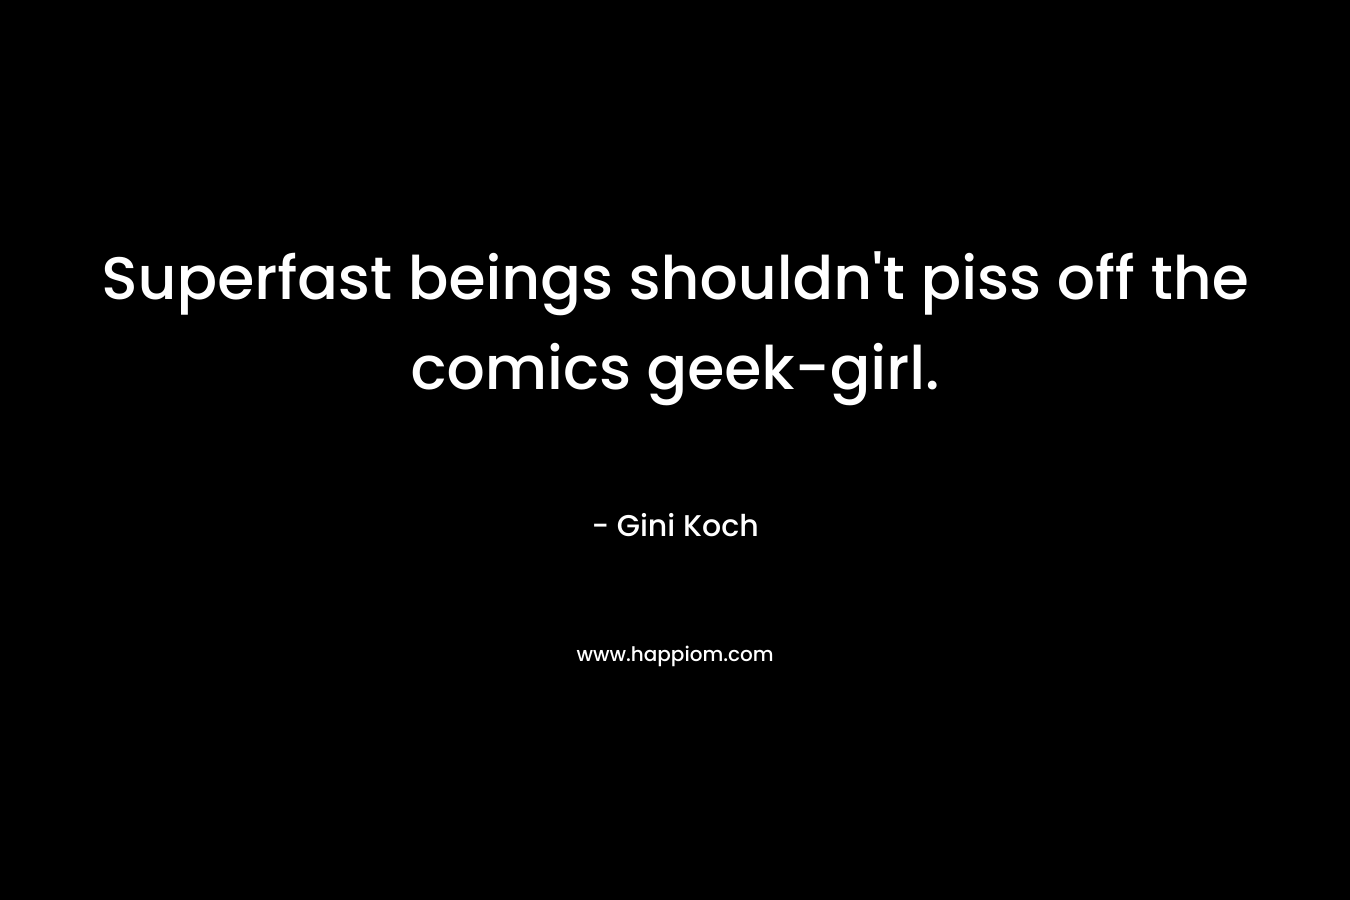 Superfast beings shouldn't piss off the comics geek-girl.